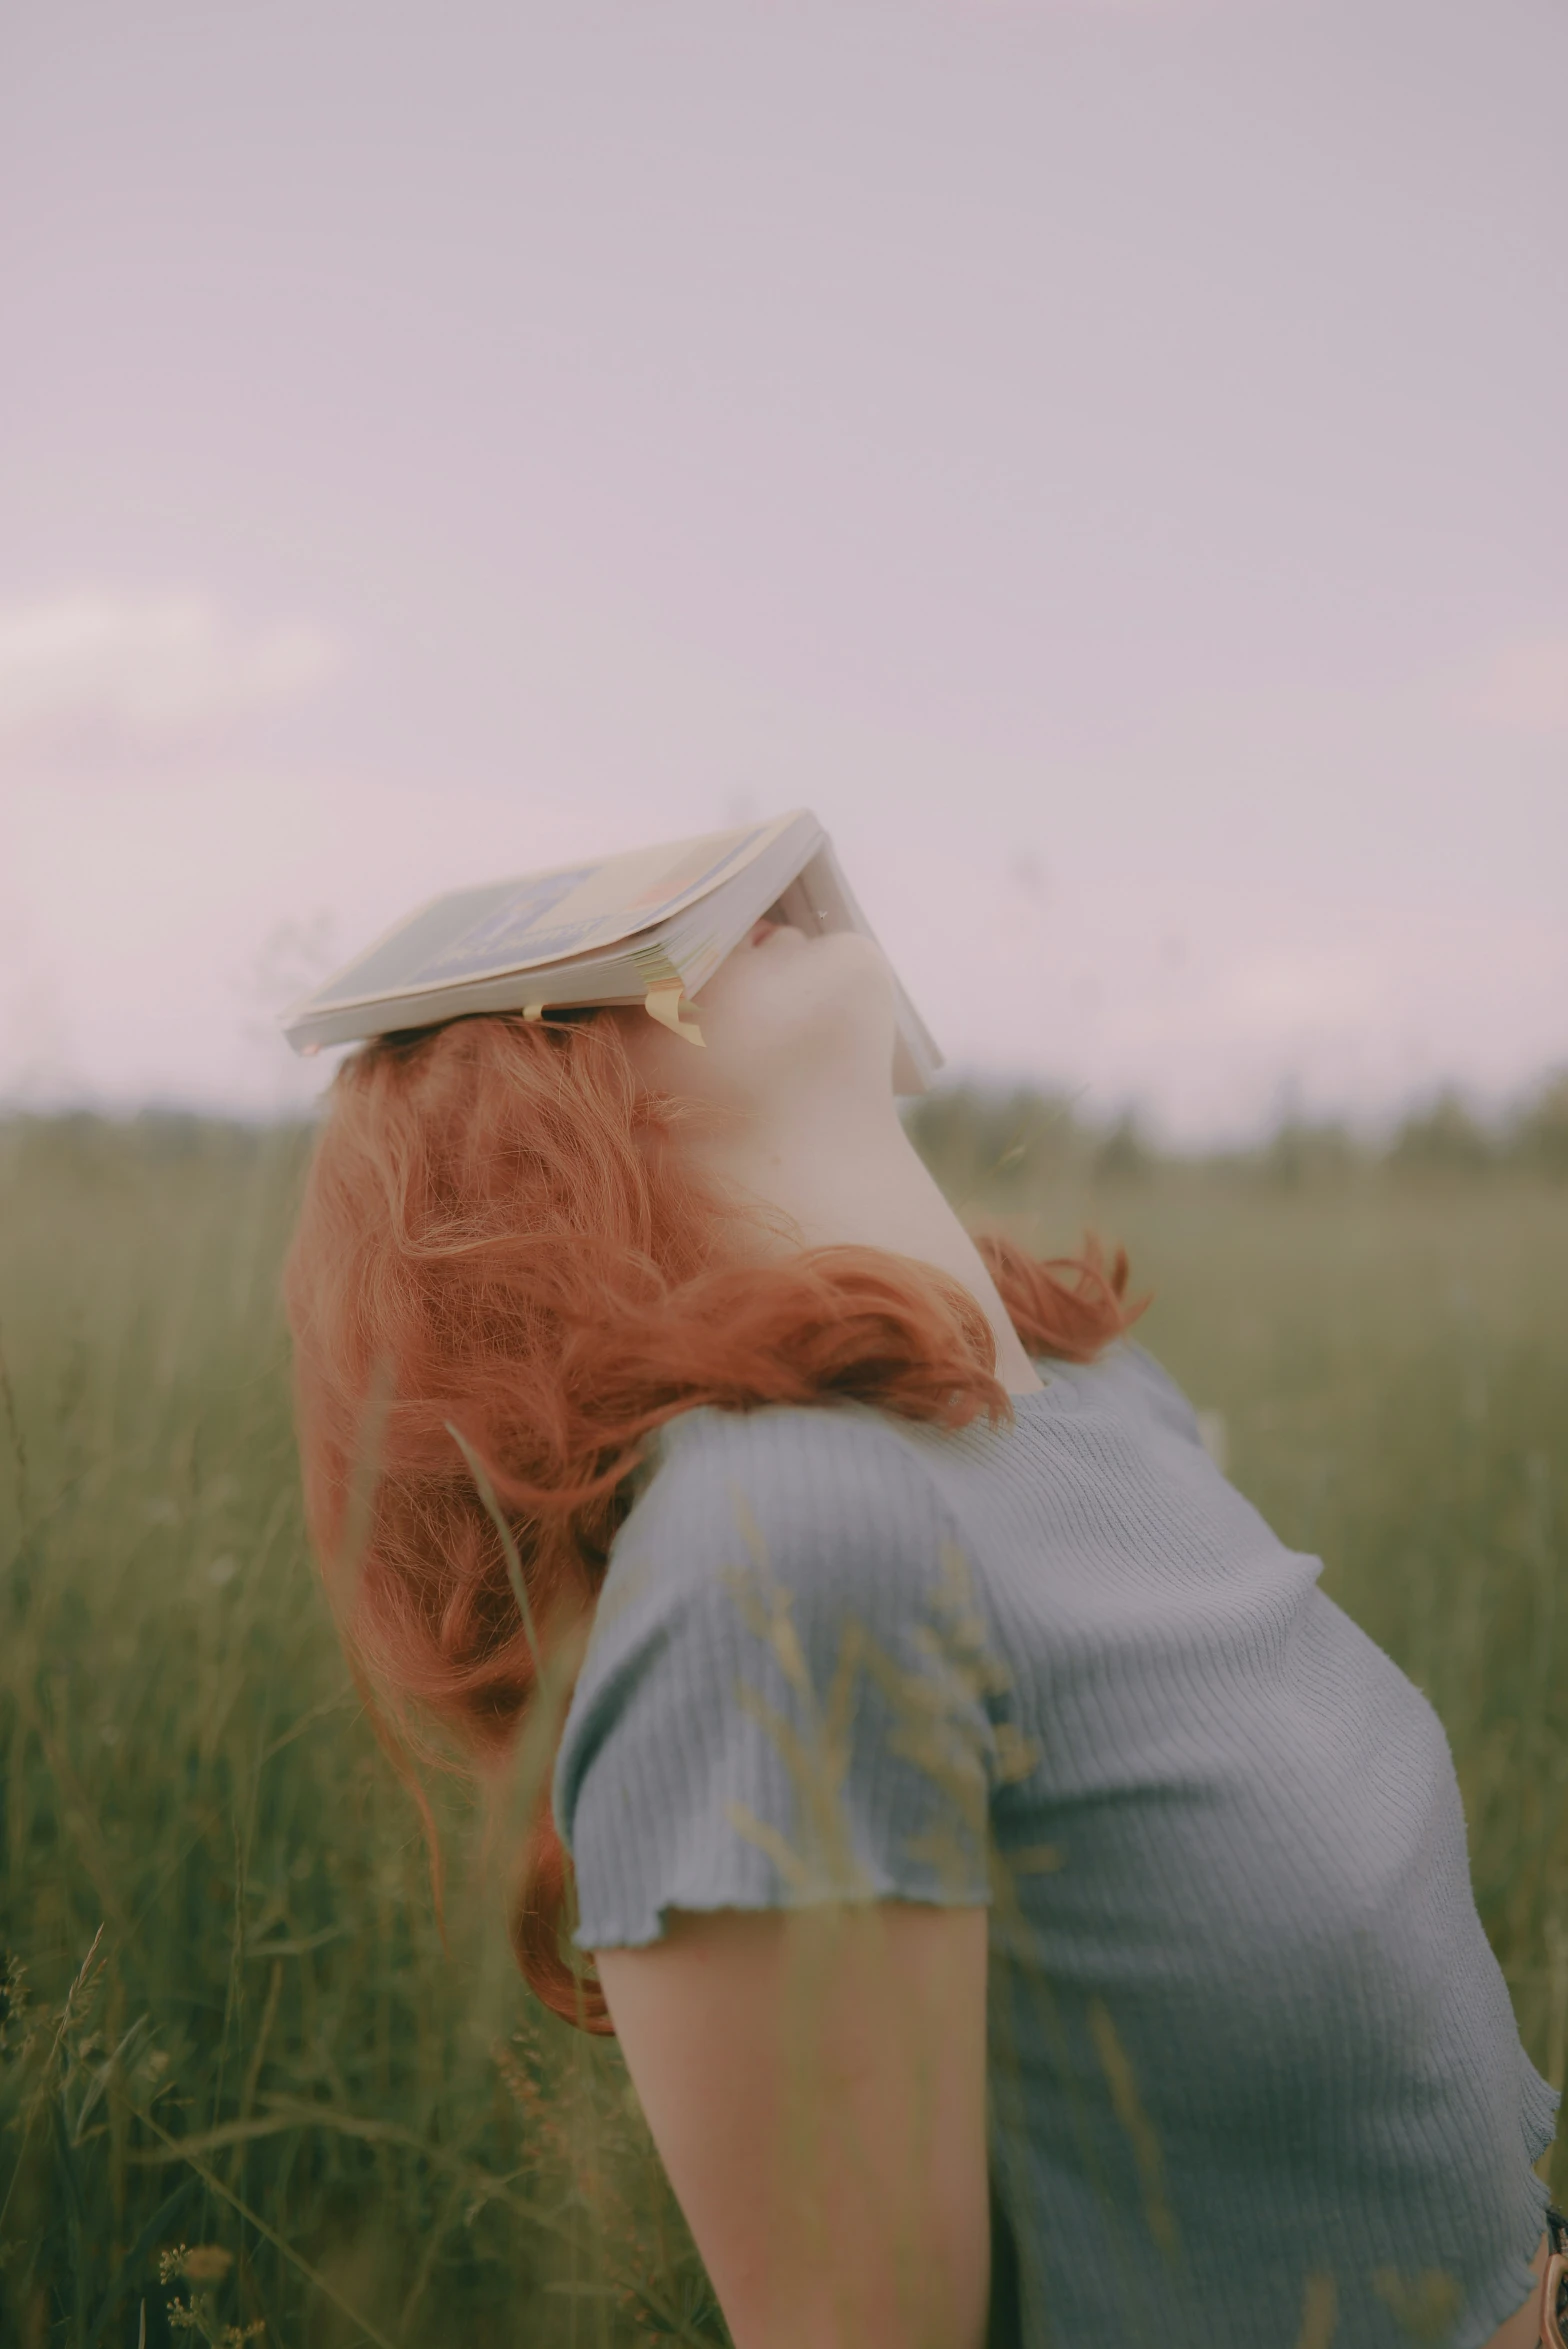 there is a red haired woman standing in a field